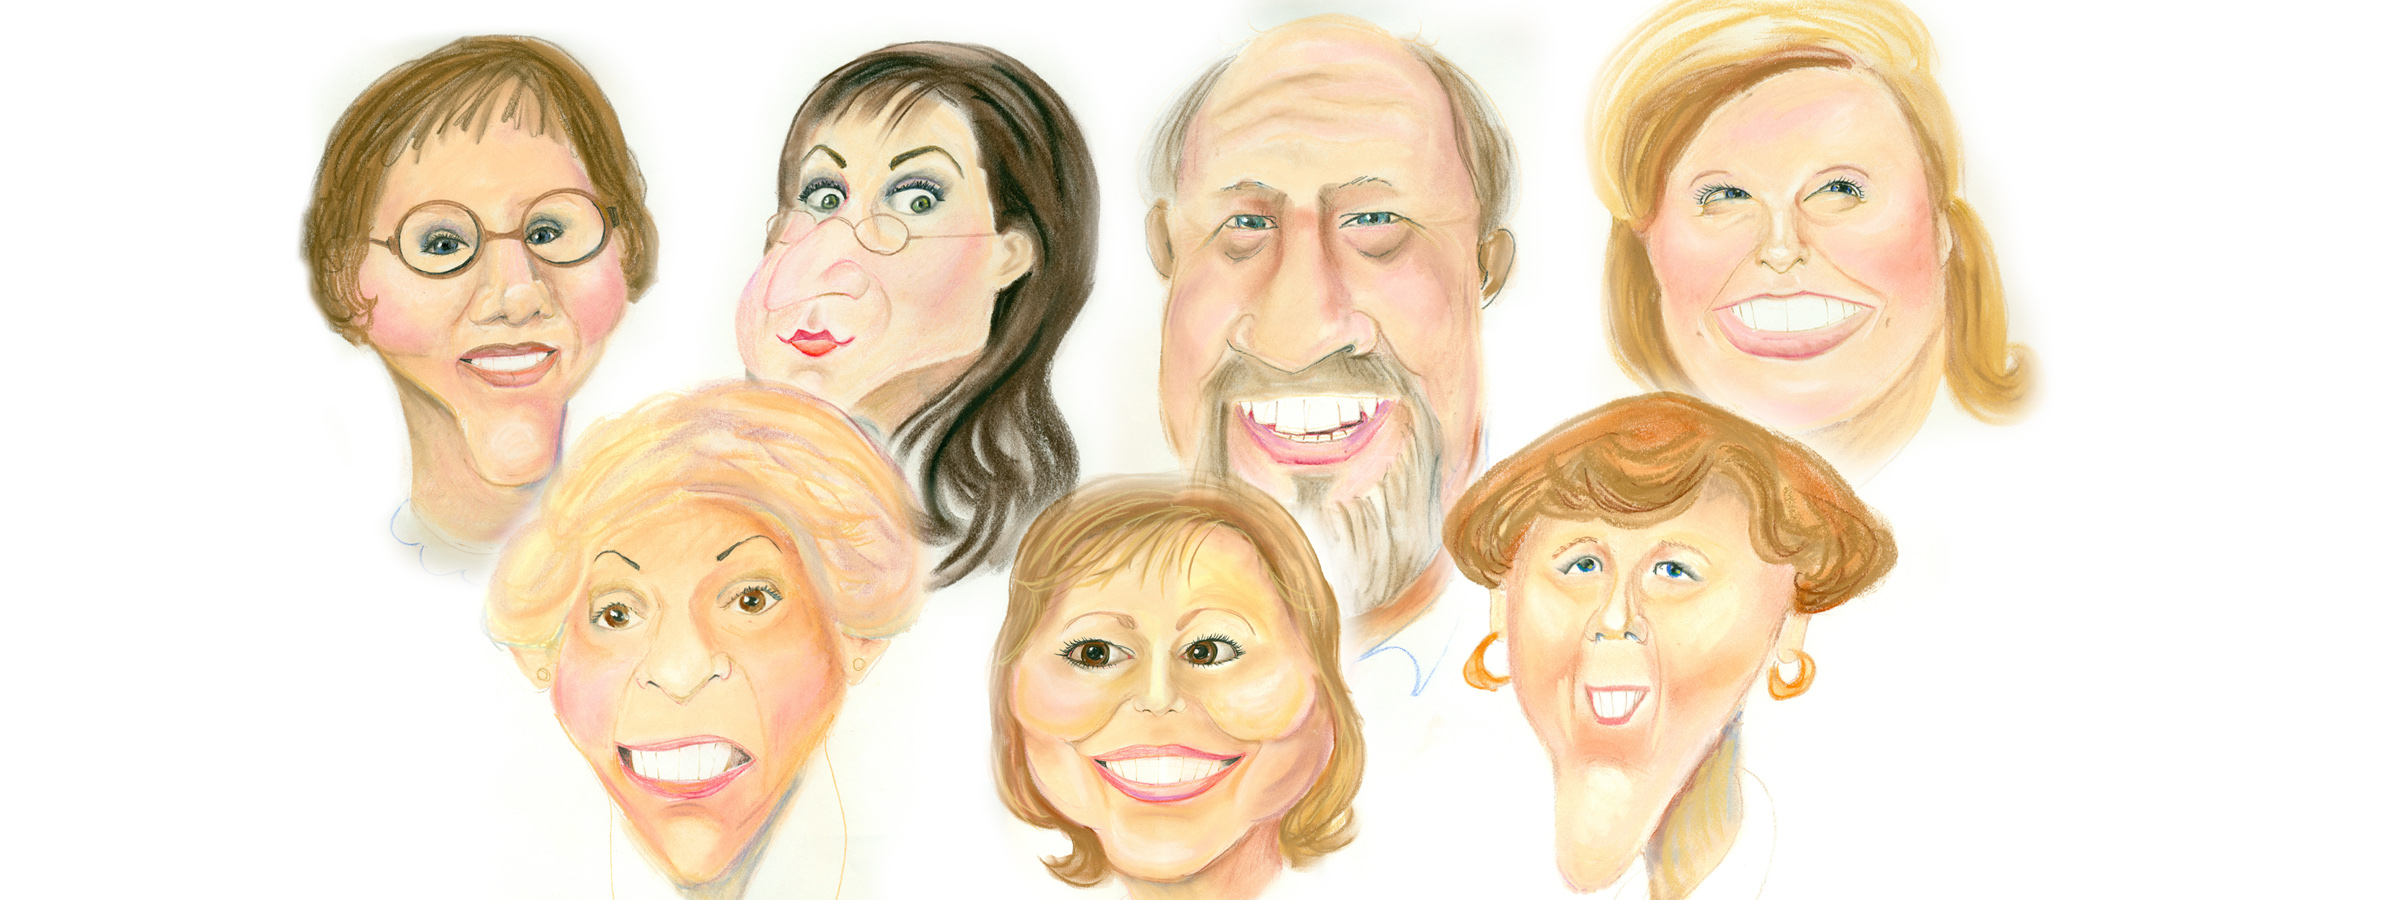 agency caricature group2019